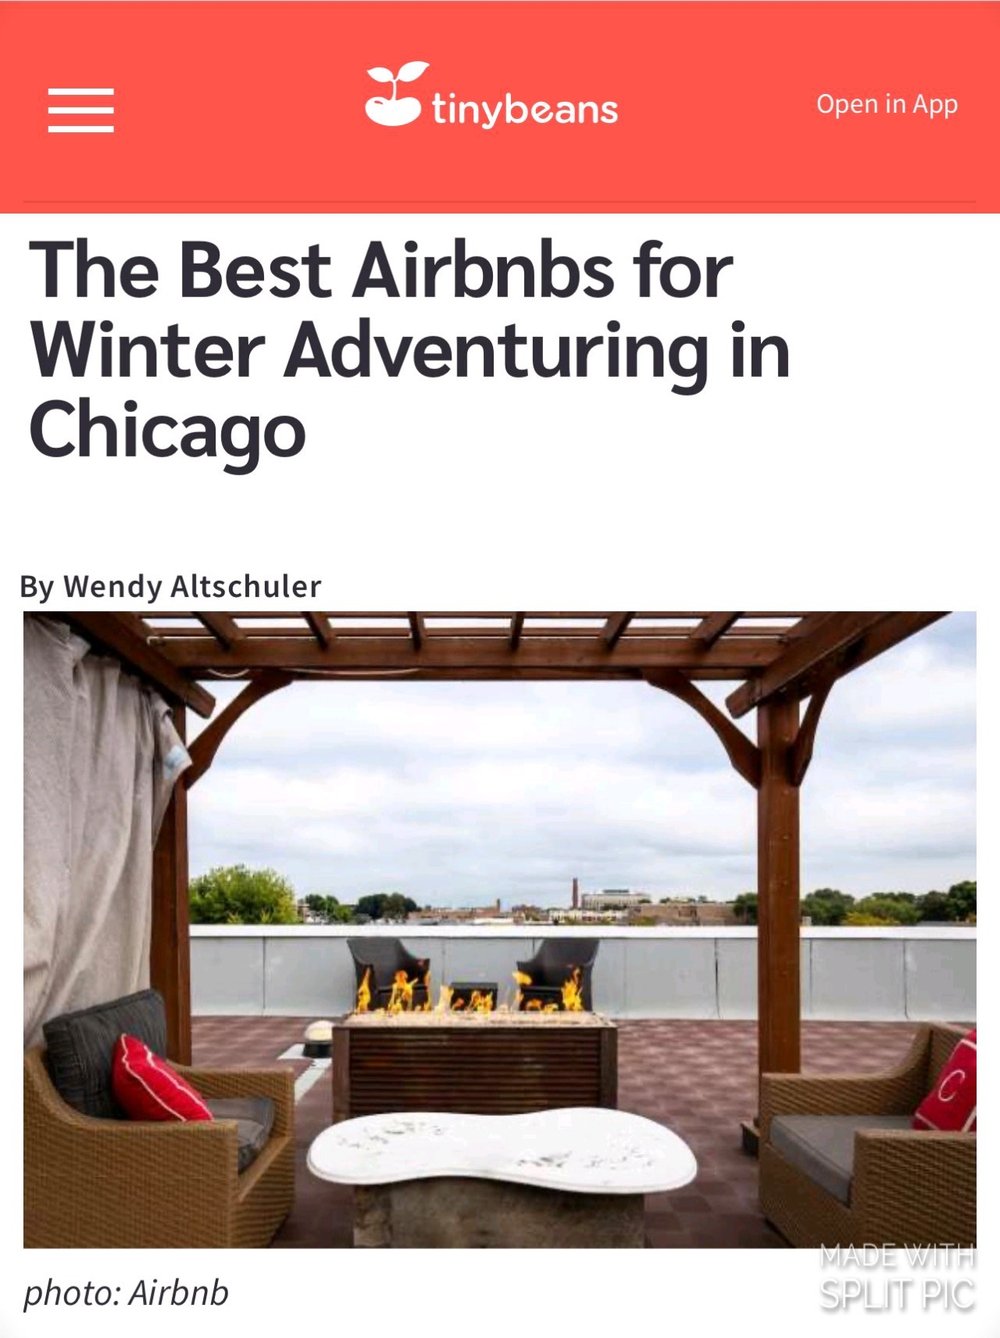 The Best Airbnbs for Winter Adventuring in Chicago